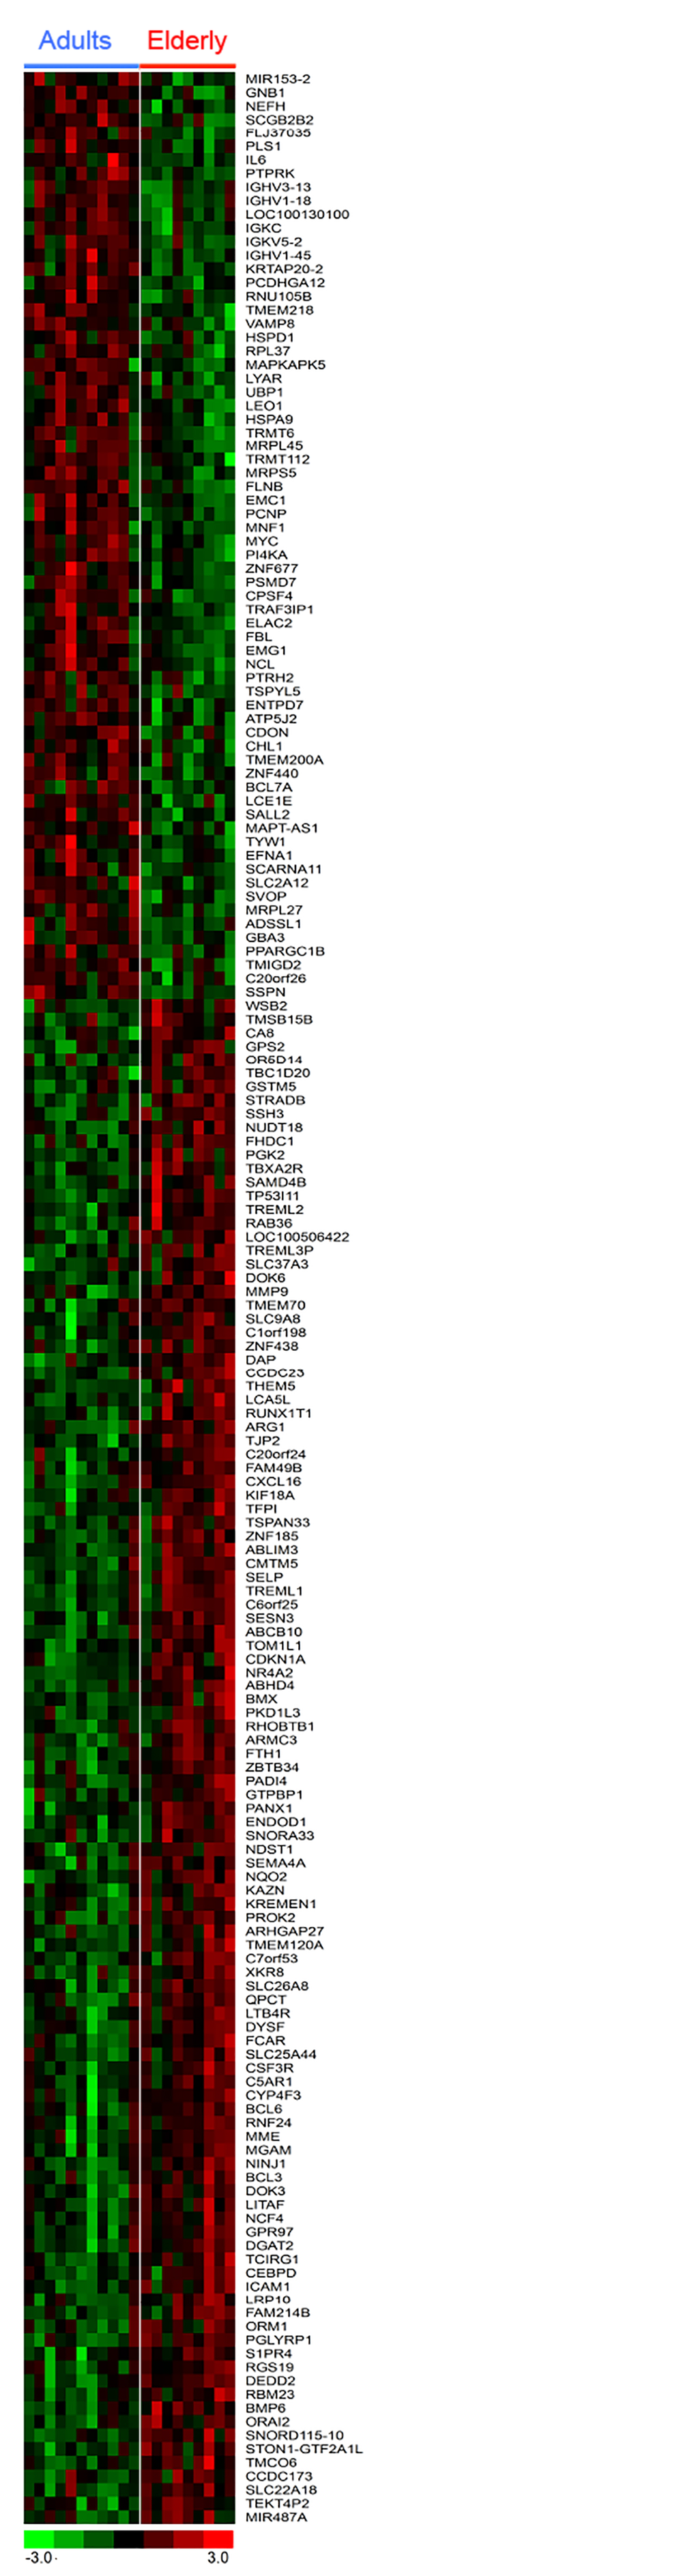 Heatmap of differen-tially expressed genes between blood samples of Adult and Elderly groups. Expression profile of 180 genes that differed between Adults and Elderly (p Table S1.